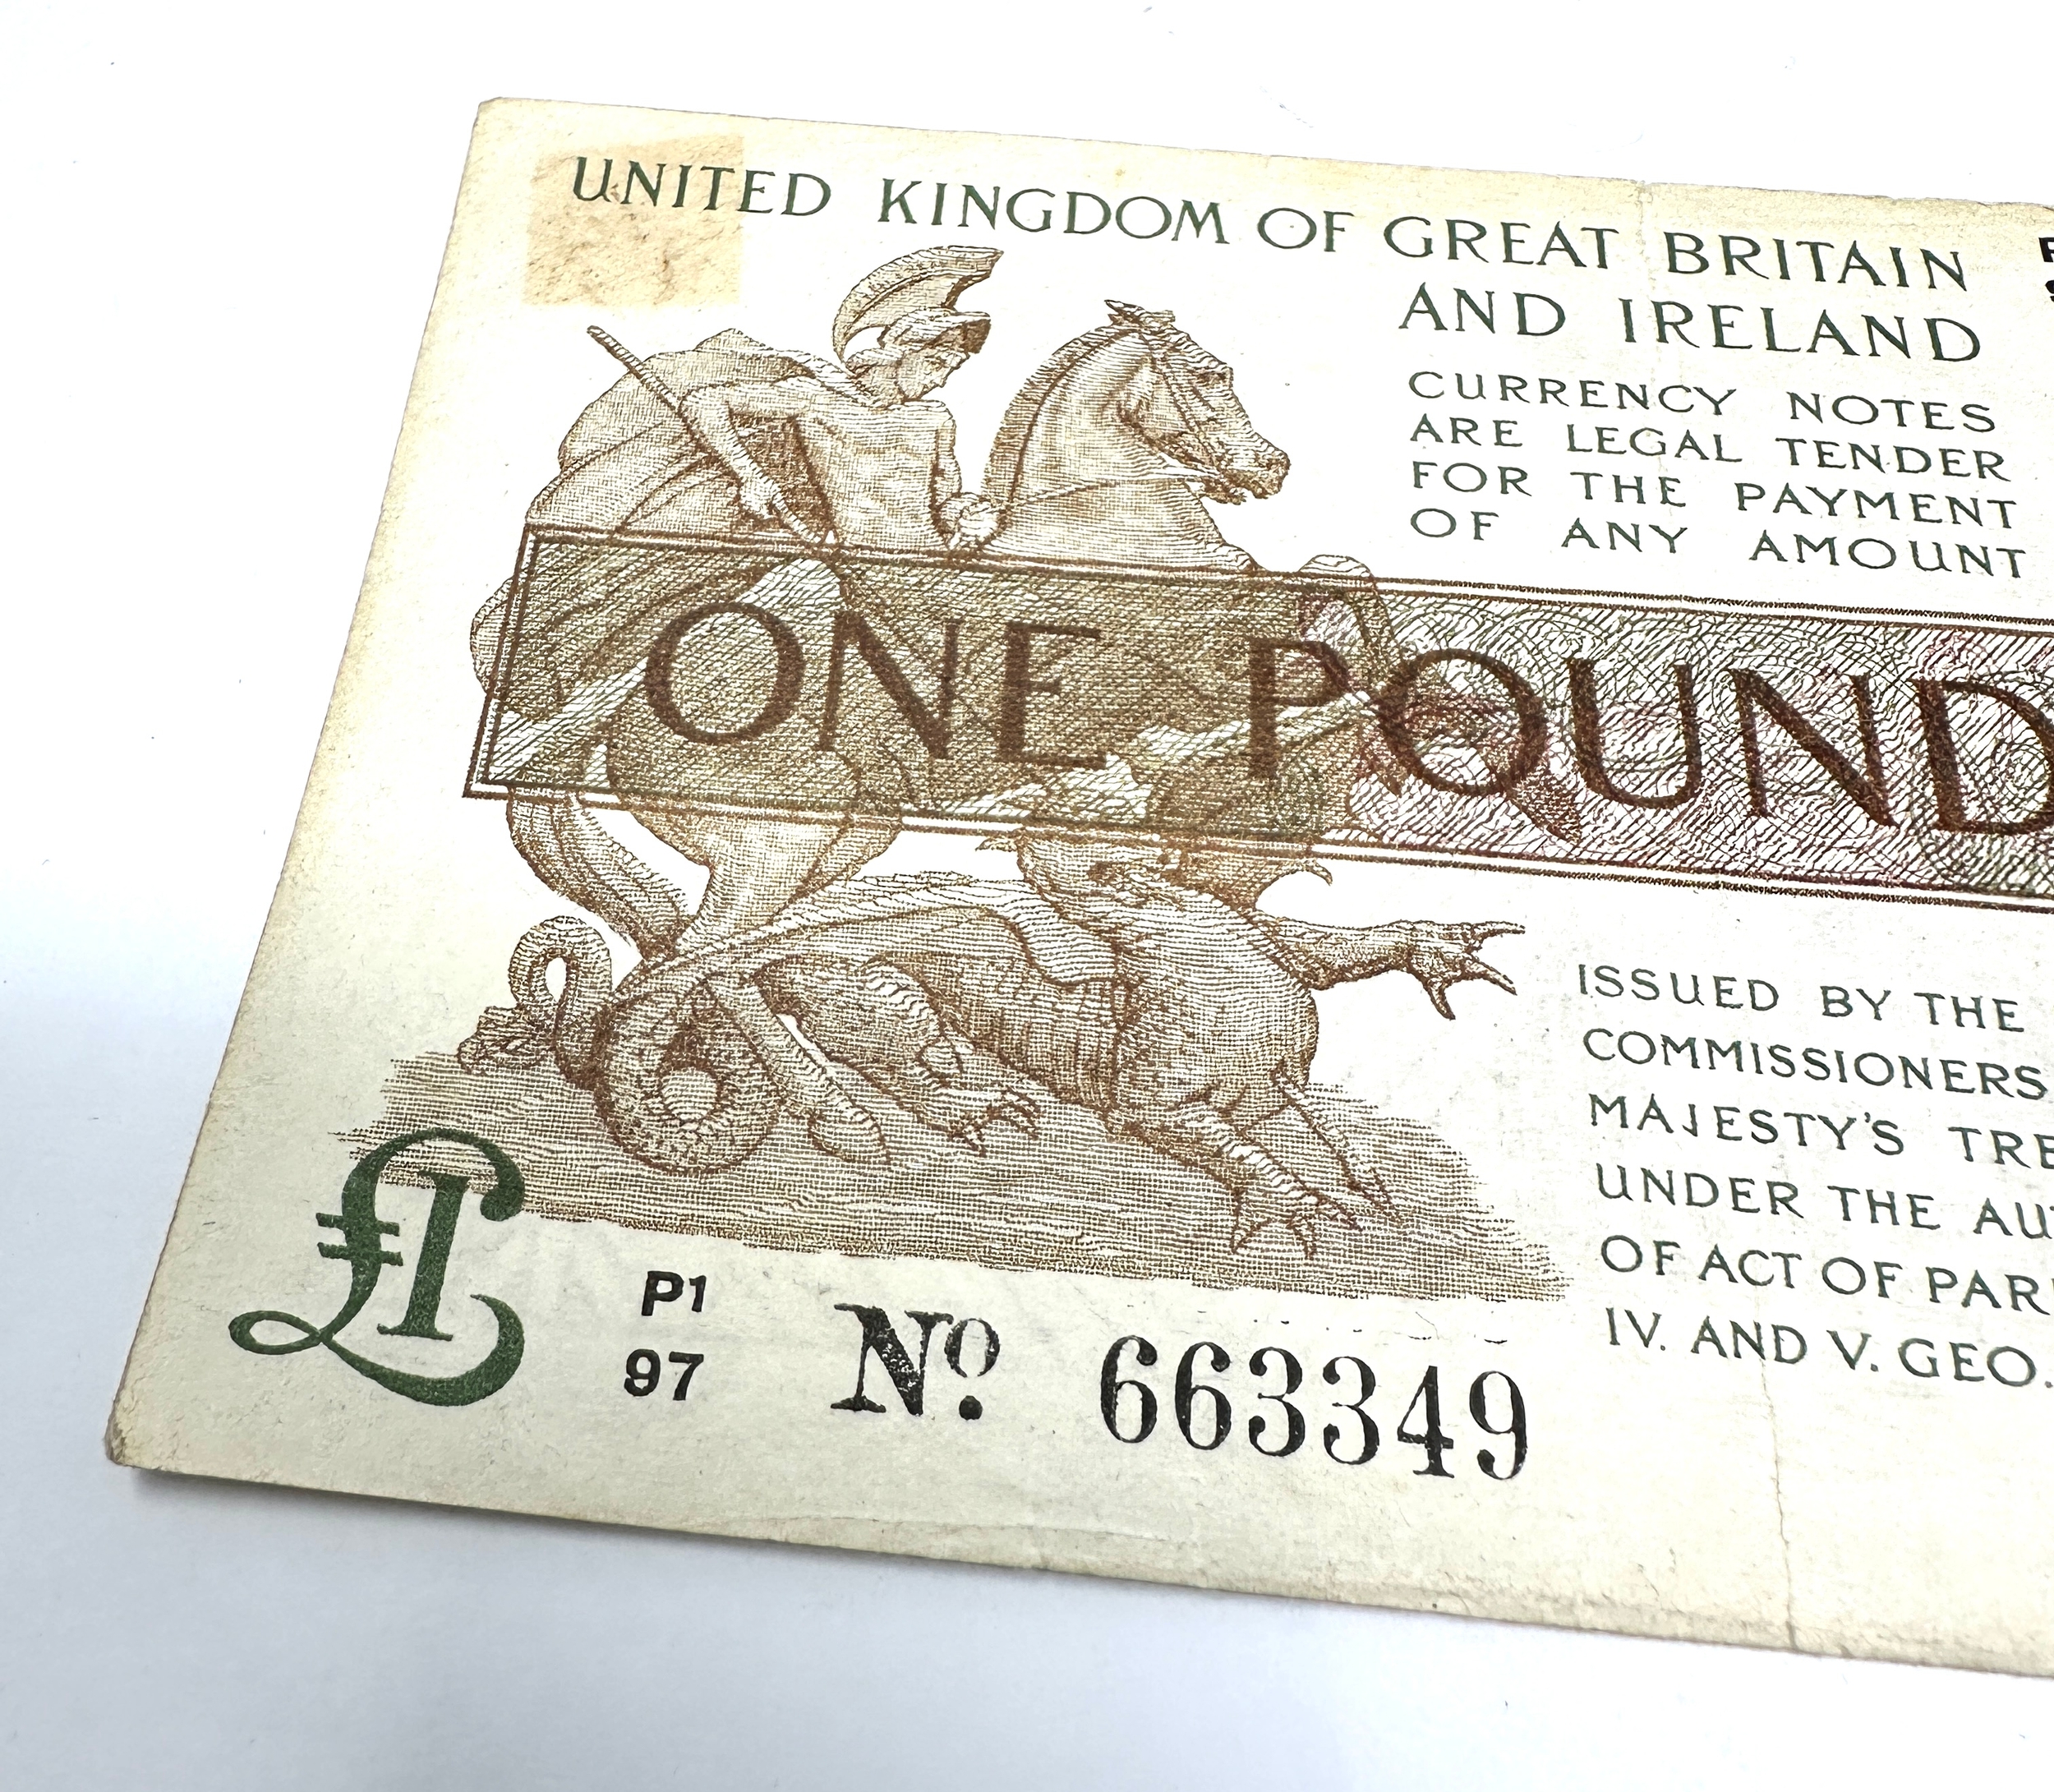 United Kingdom of Great Britain and Ireland one pound - Image 4 of 4